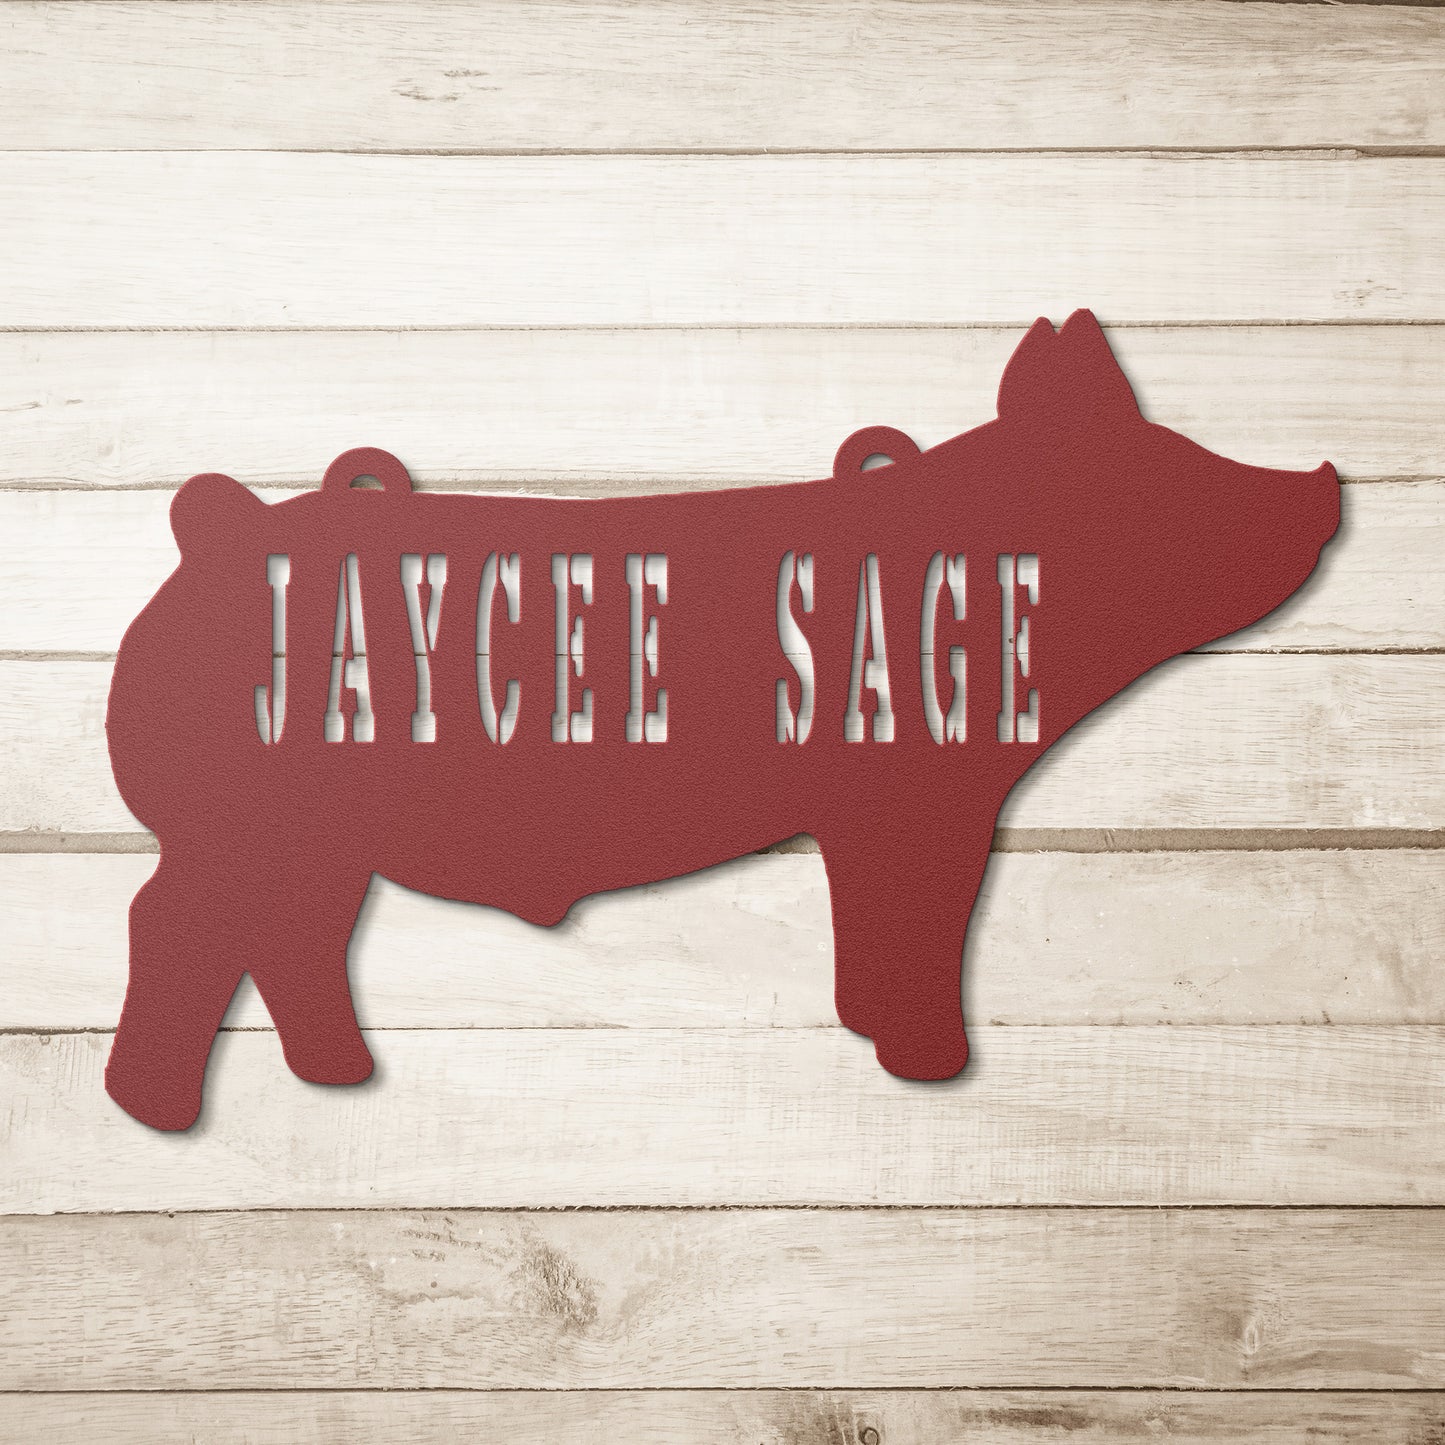 Customized Name Punched Out Livestock Show Pig Metal Art, Show Swine Wall Art, 18-gauge steel